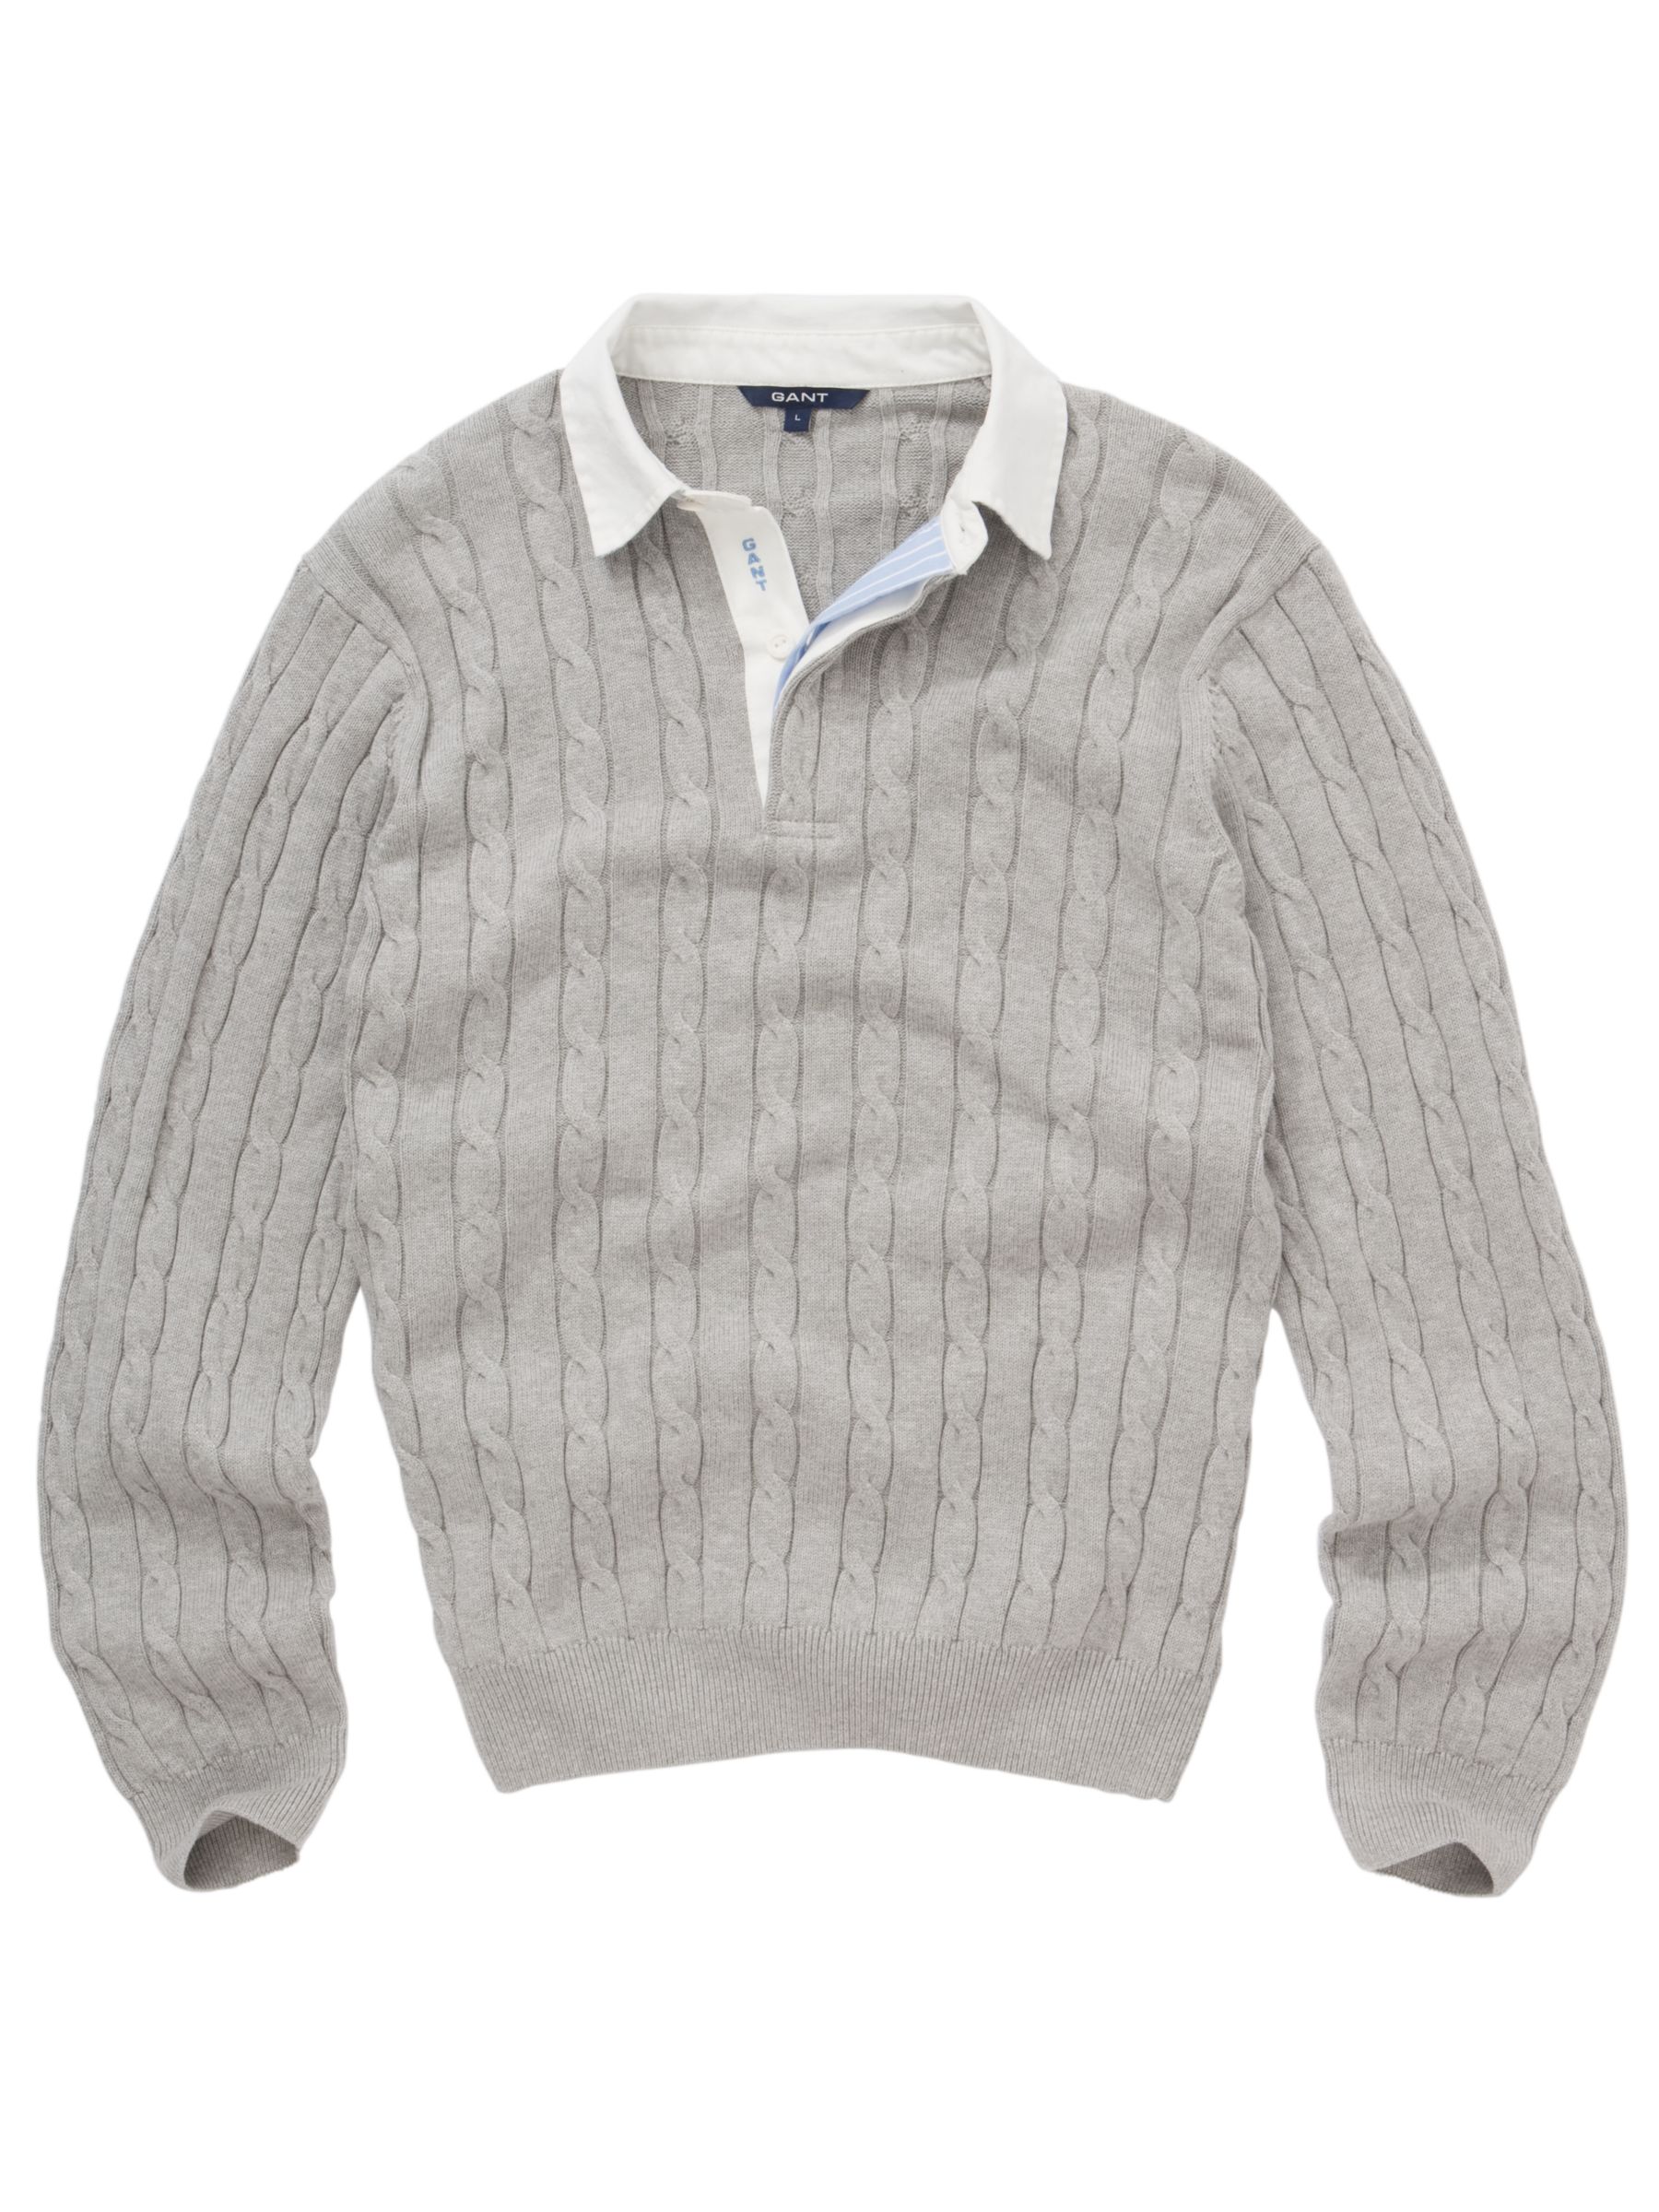 Cable Knit Rugby Shirt, Grey